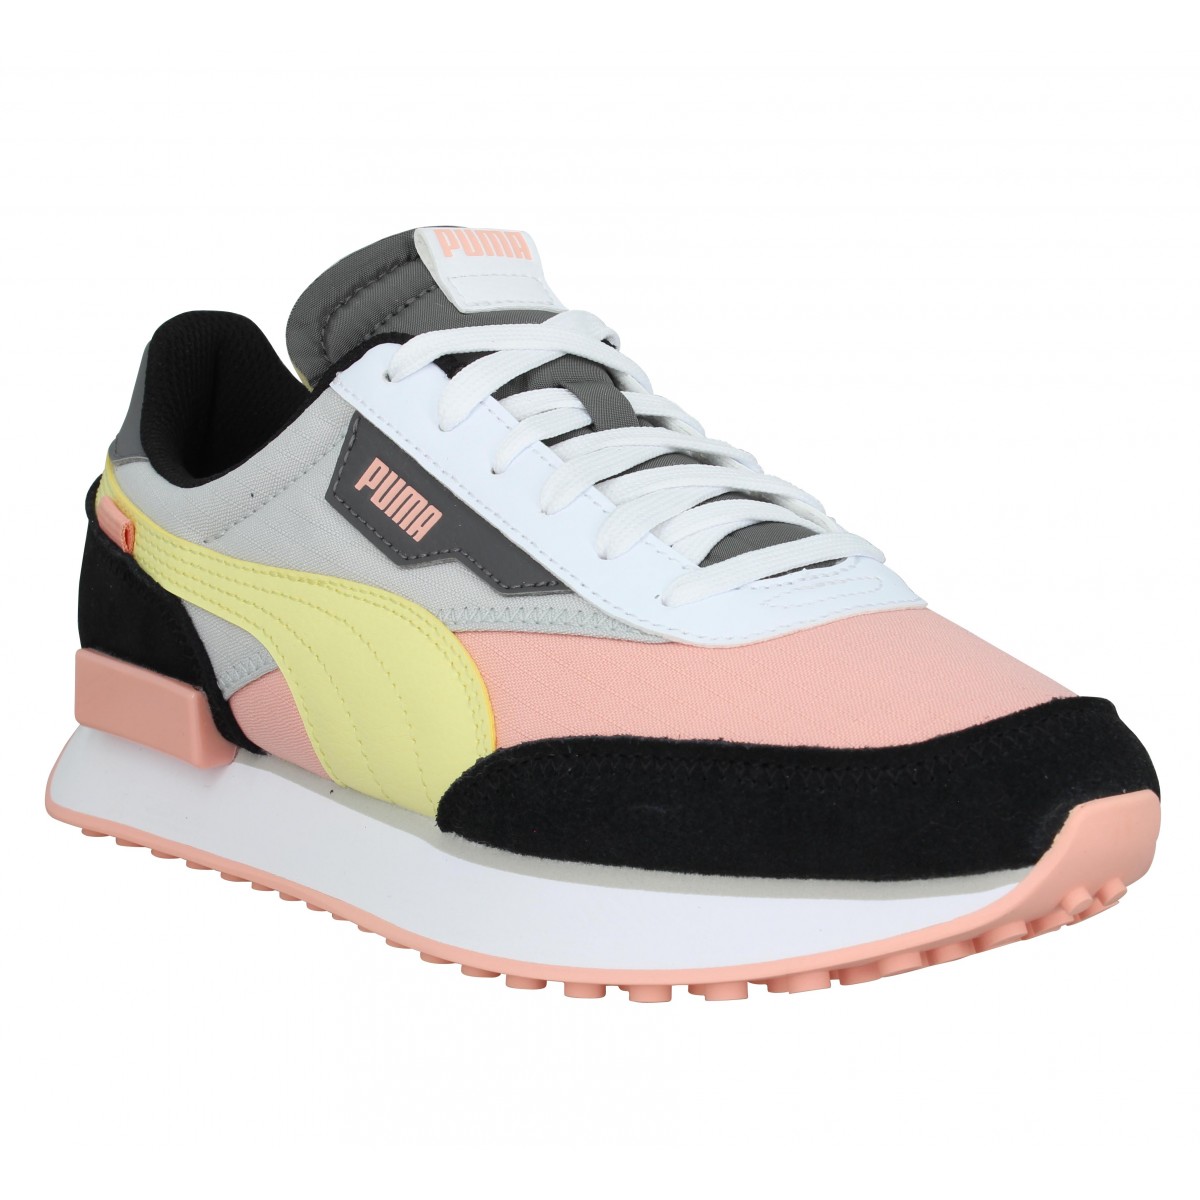 PUMA Future Rider Play On velours toile Femme Abricot Gris